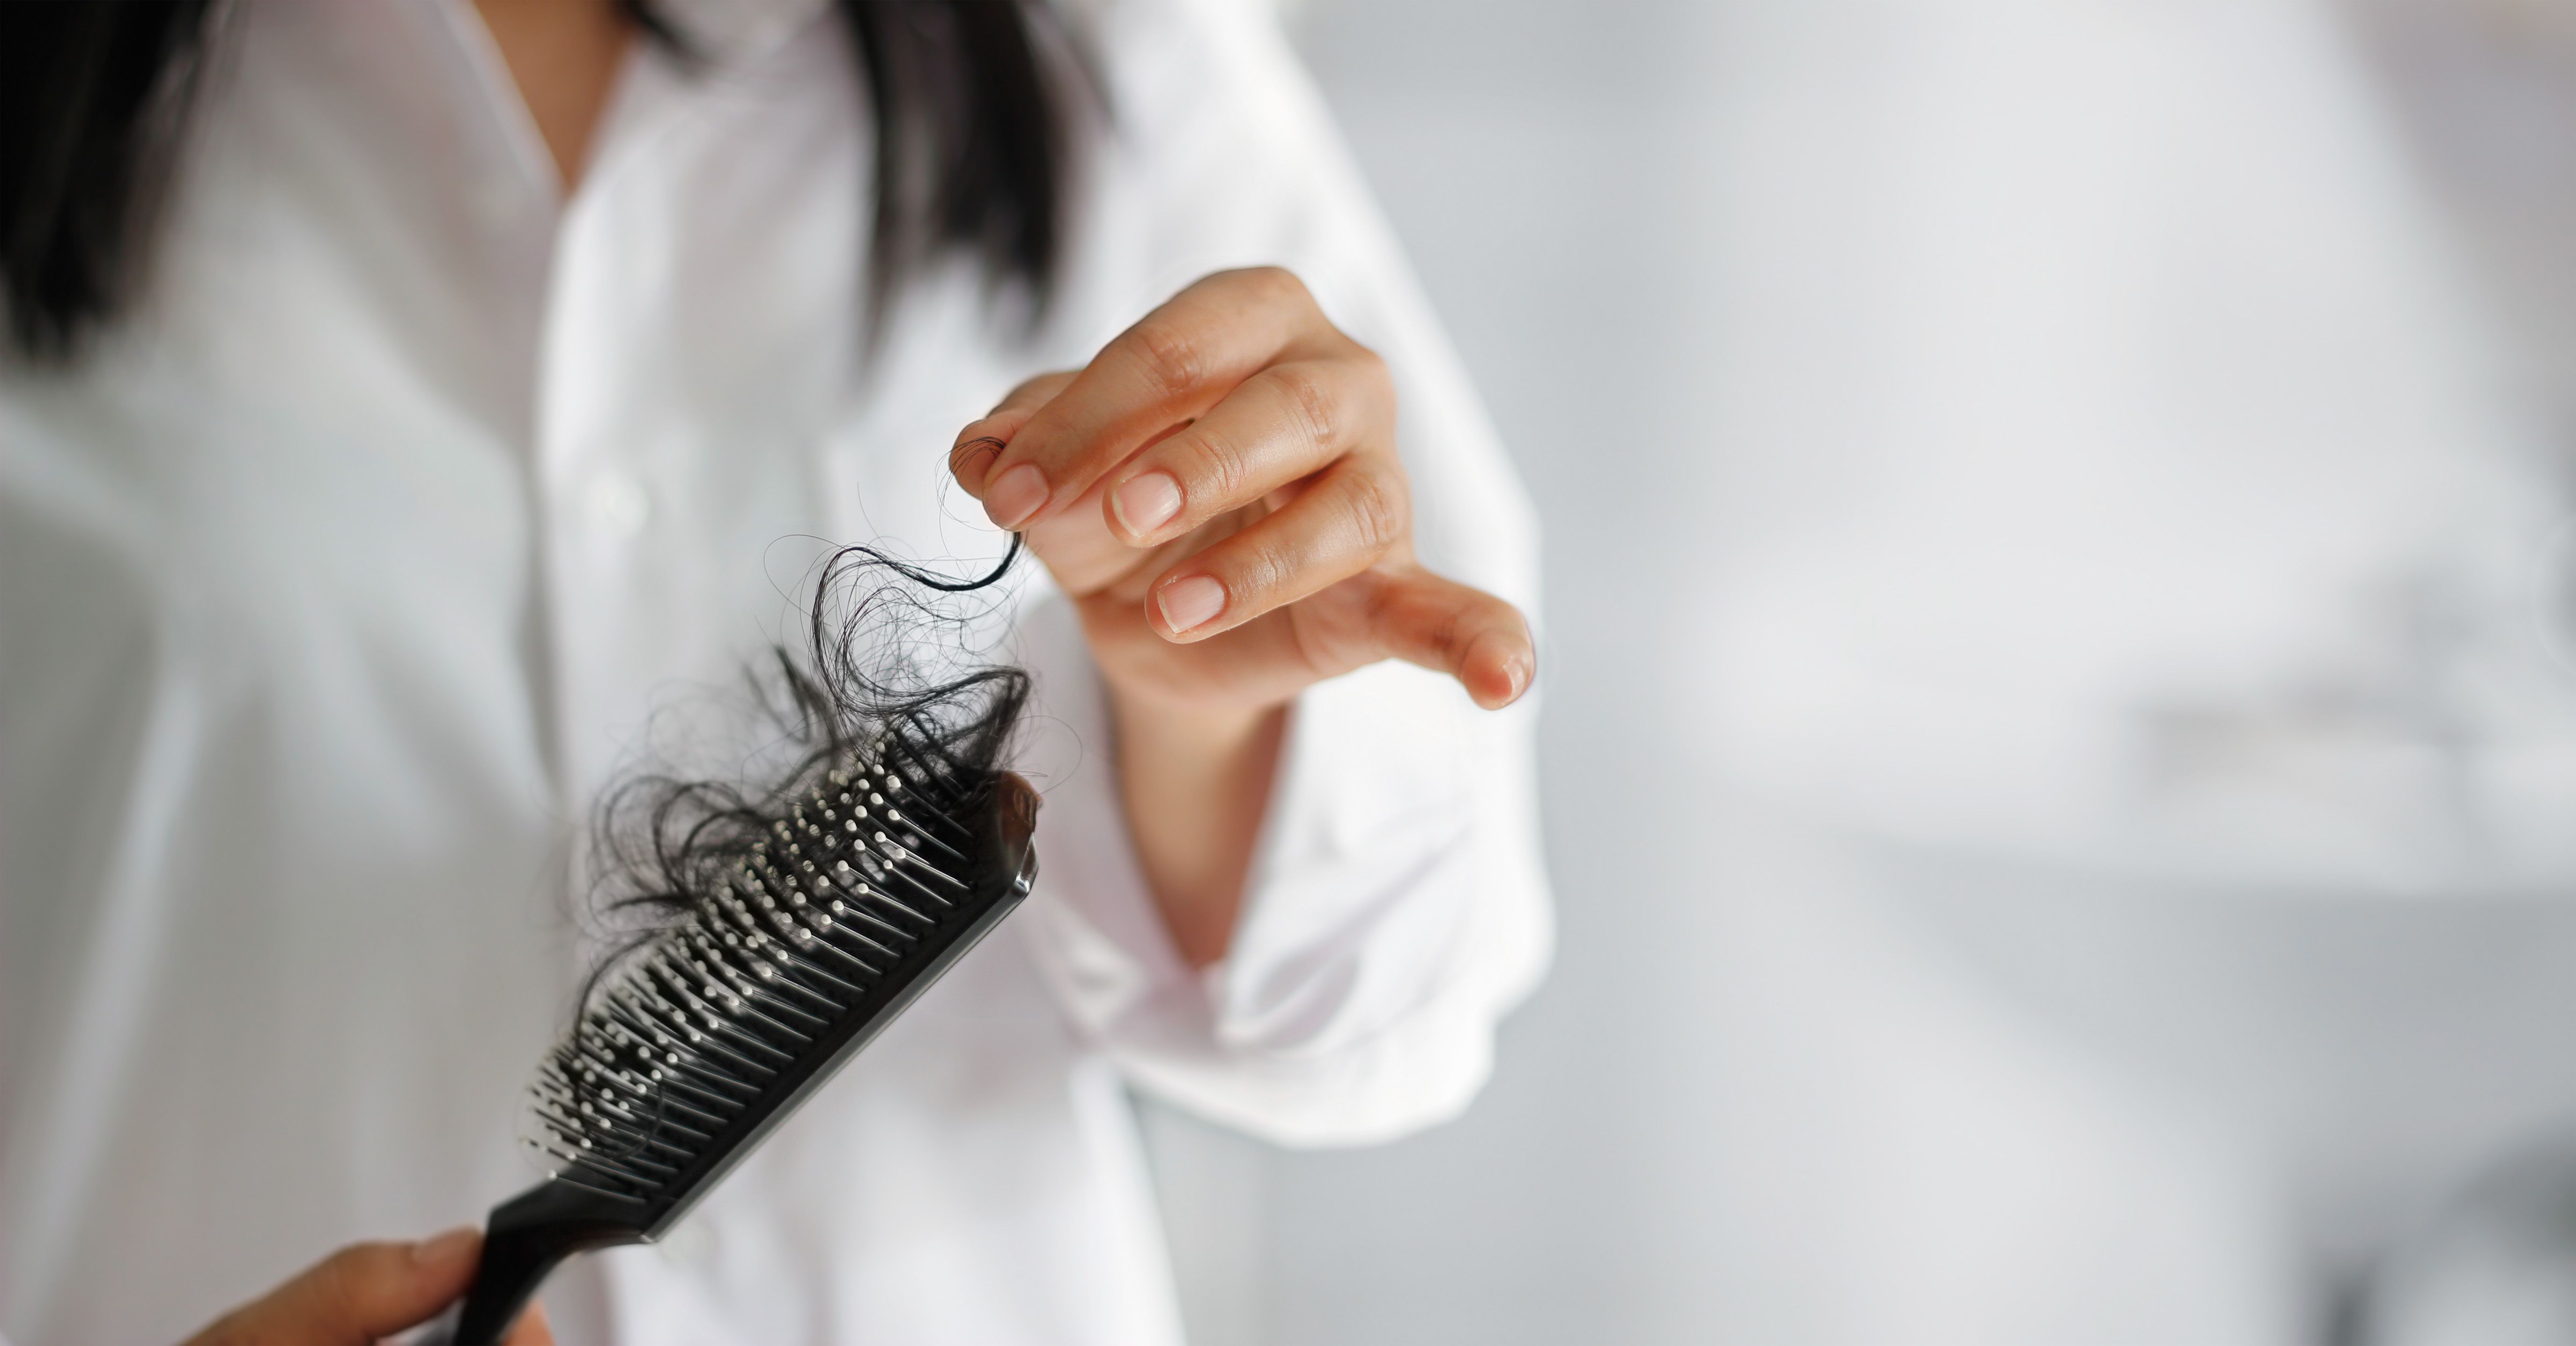 Why Is My Hair Falling Out? 8 Triggers Of Female Hair Loss